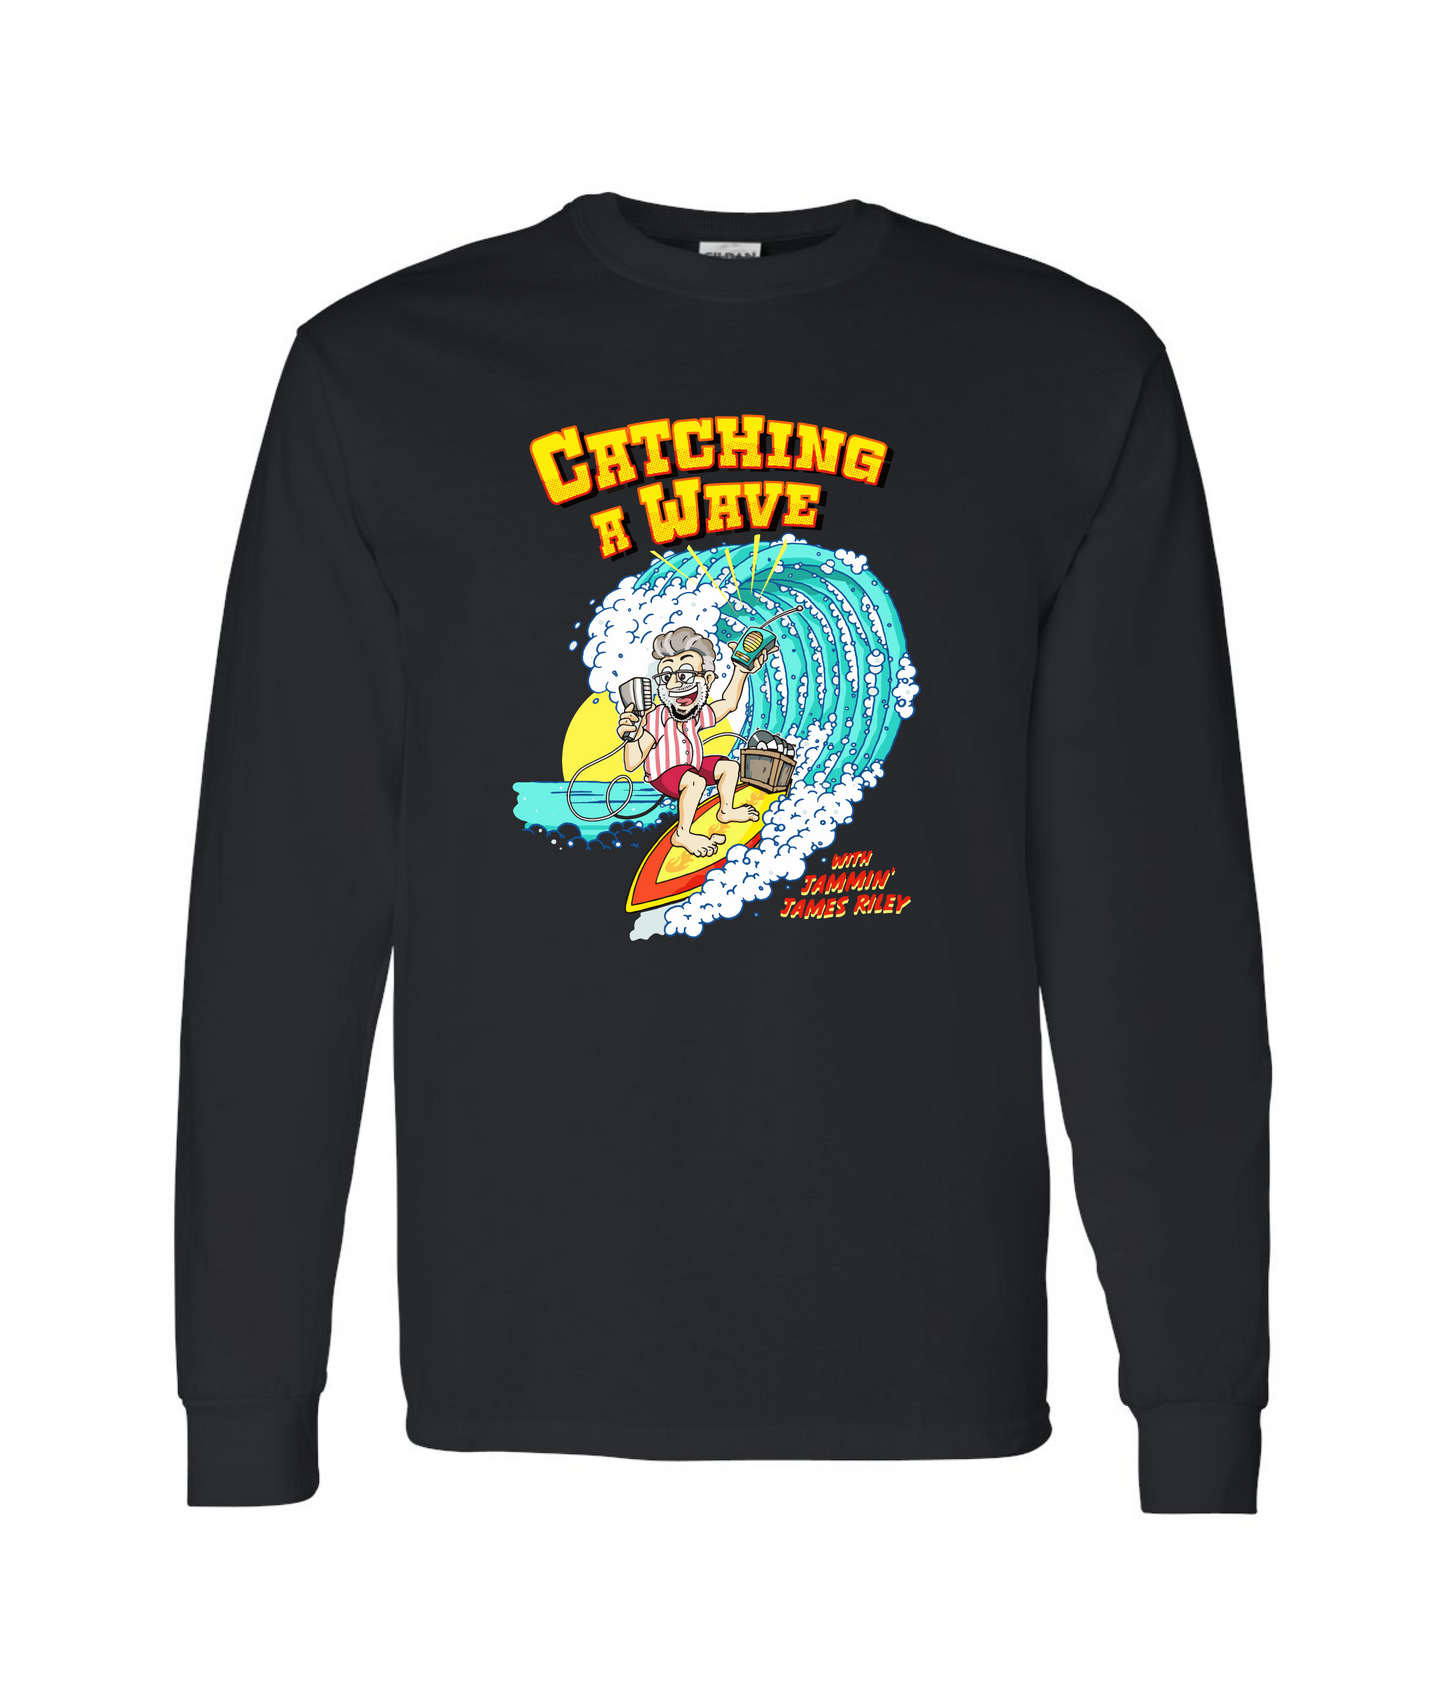 Team Riley Radio - Catching a Wave - Long Sleeve T